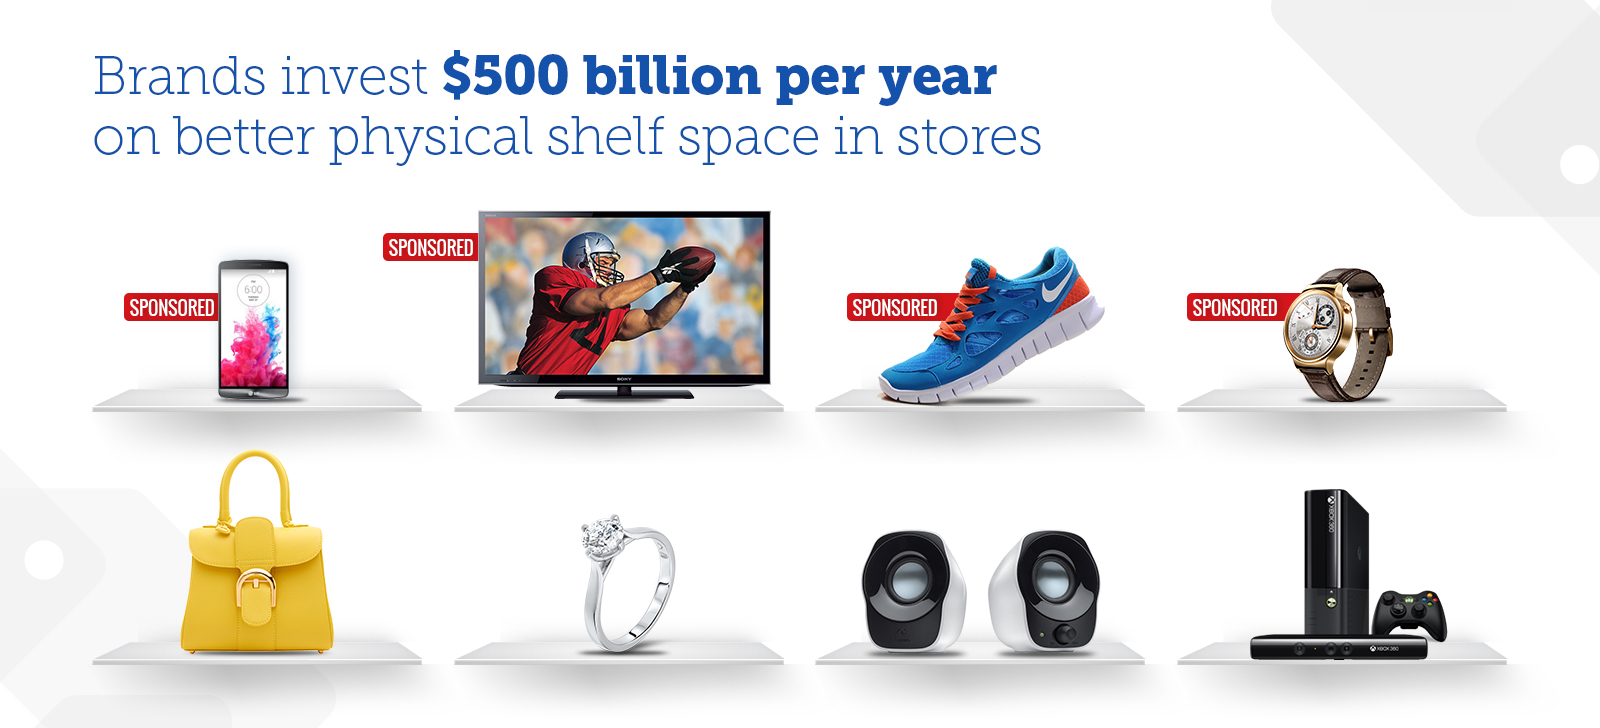 Brands invest $500 billion per year on better physical shelf space in stores